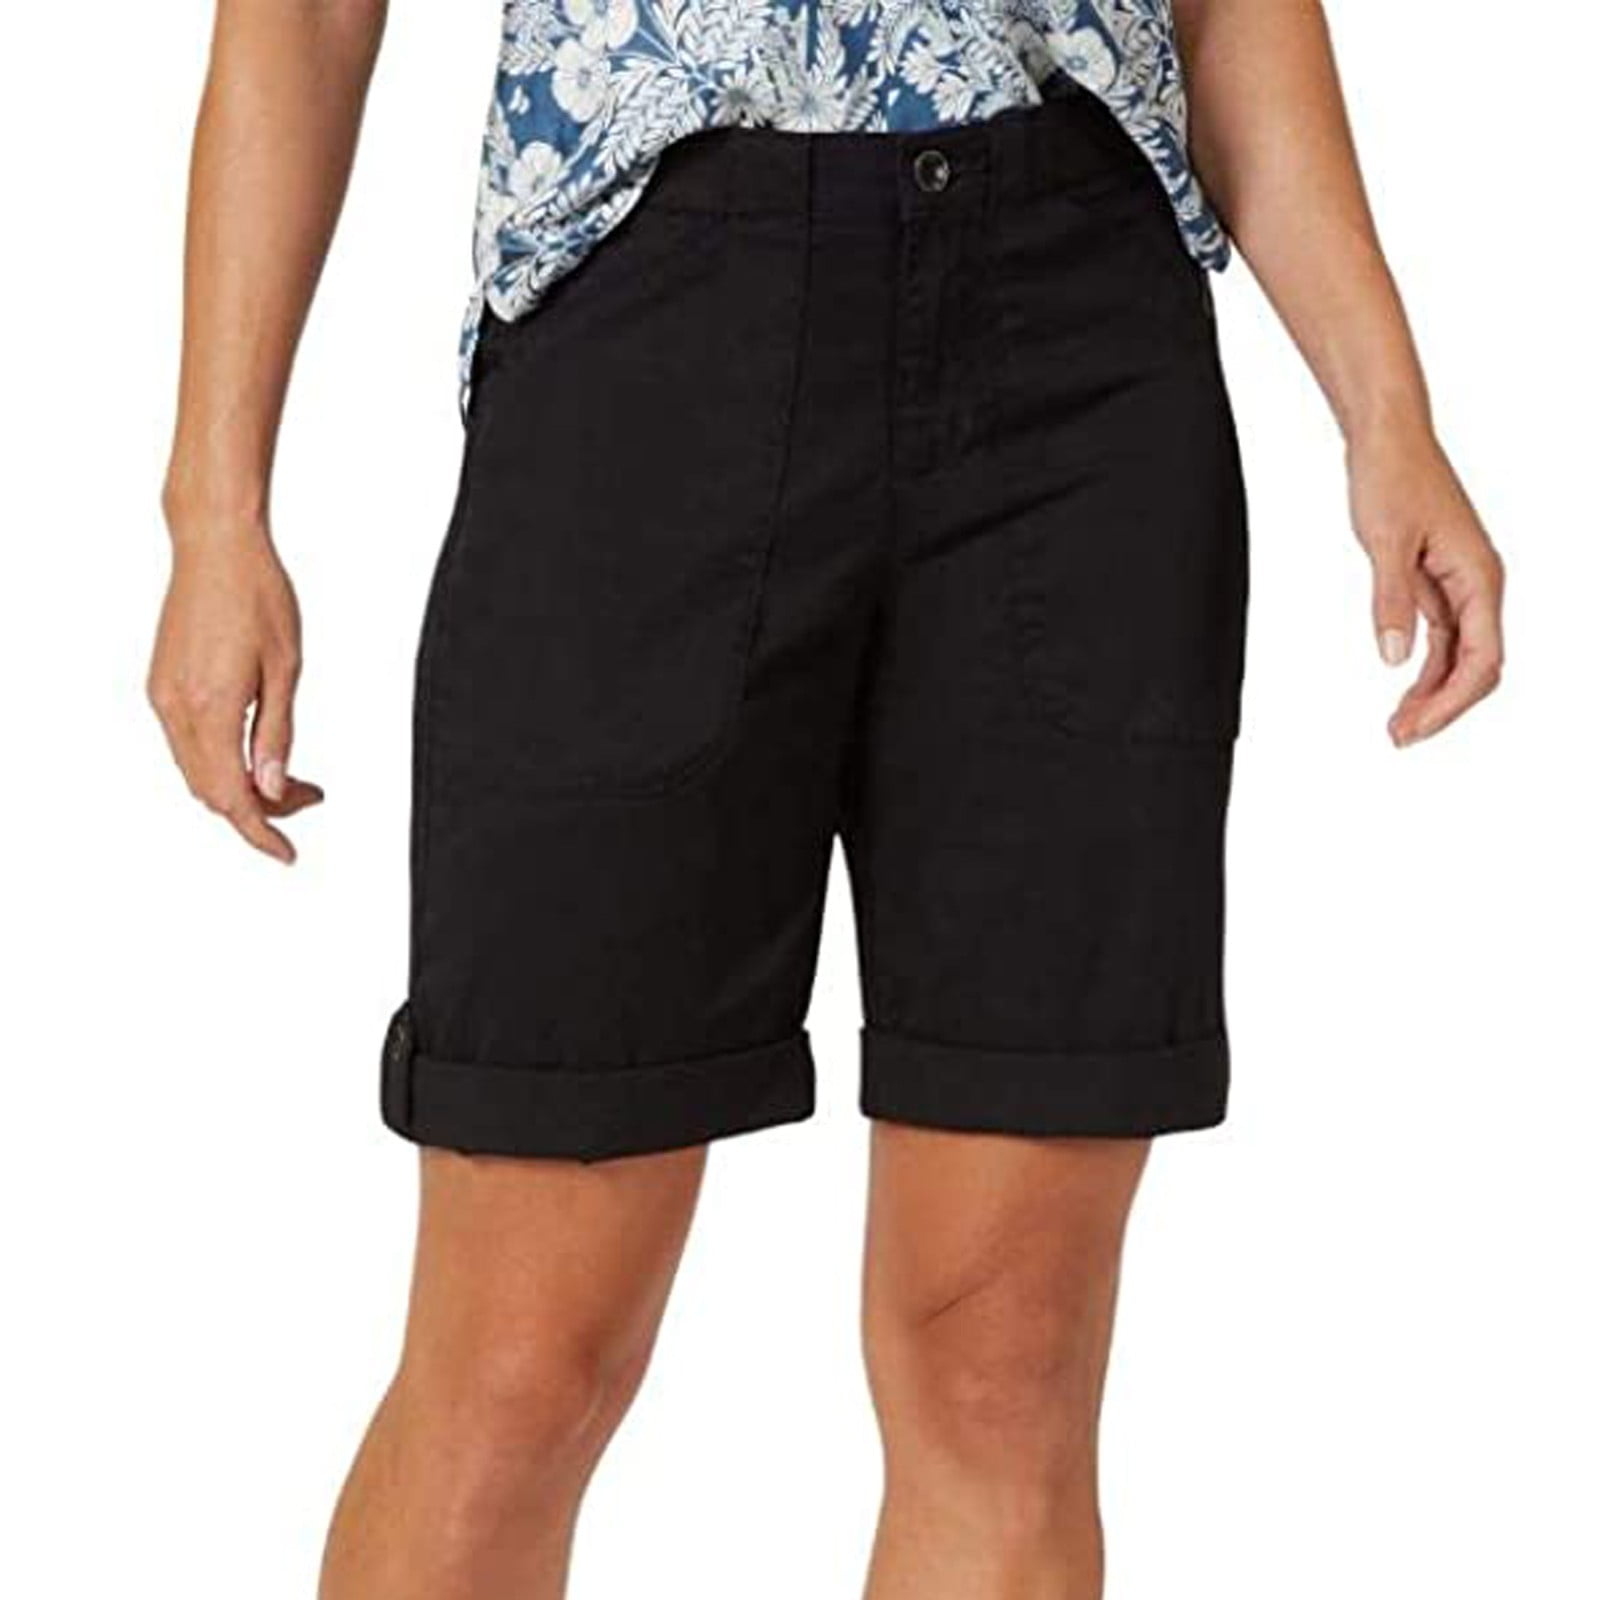 NECHOLOGY Plus Size Shorts For Women Women's Petite Flex-to-go Mid-Rise  Relaxed Fit Cargo Bermuda Short Black X-Large